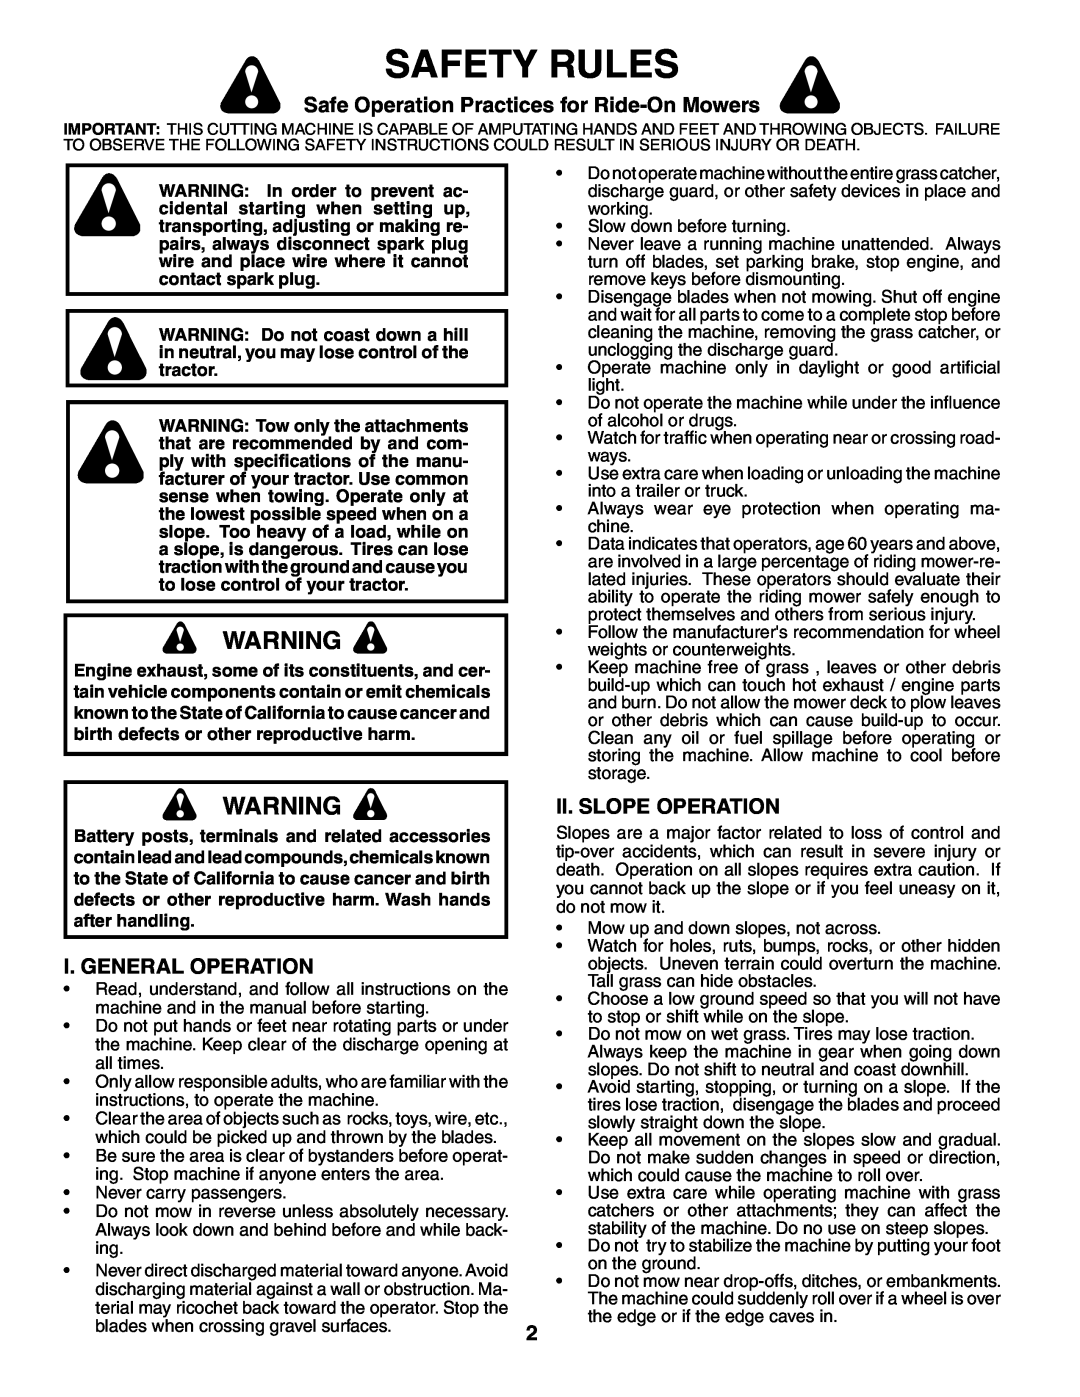 Poulan BB185H42YT Safety Rules, Safe Operation Practices for Ride-On Mowers, I. General Operation, Ii. Slope Operation 